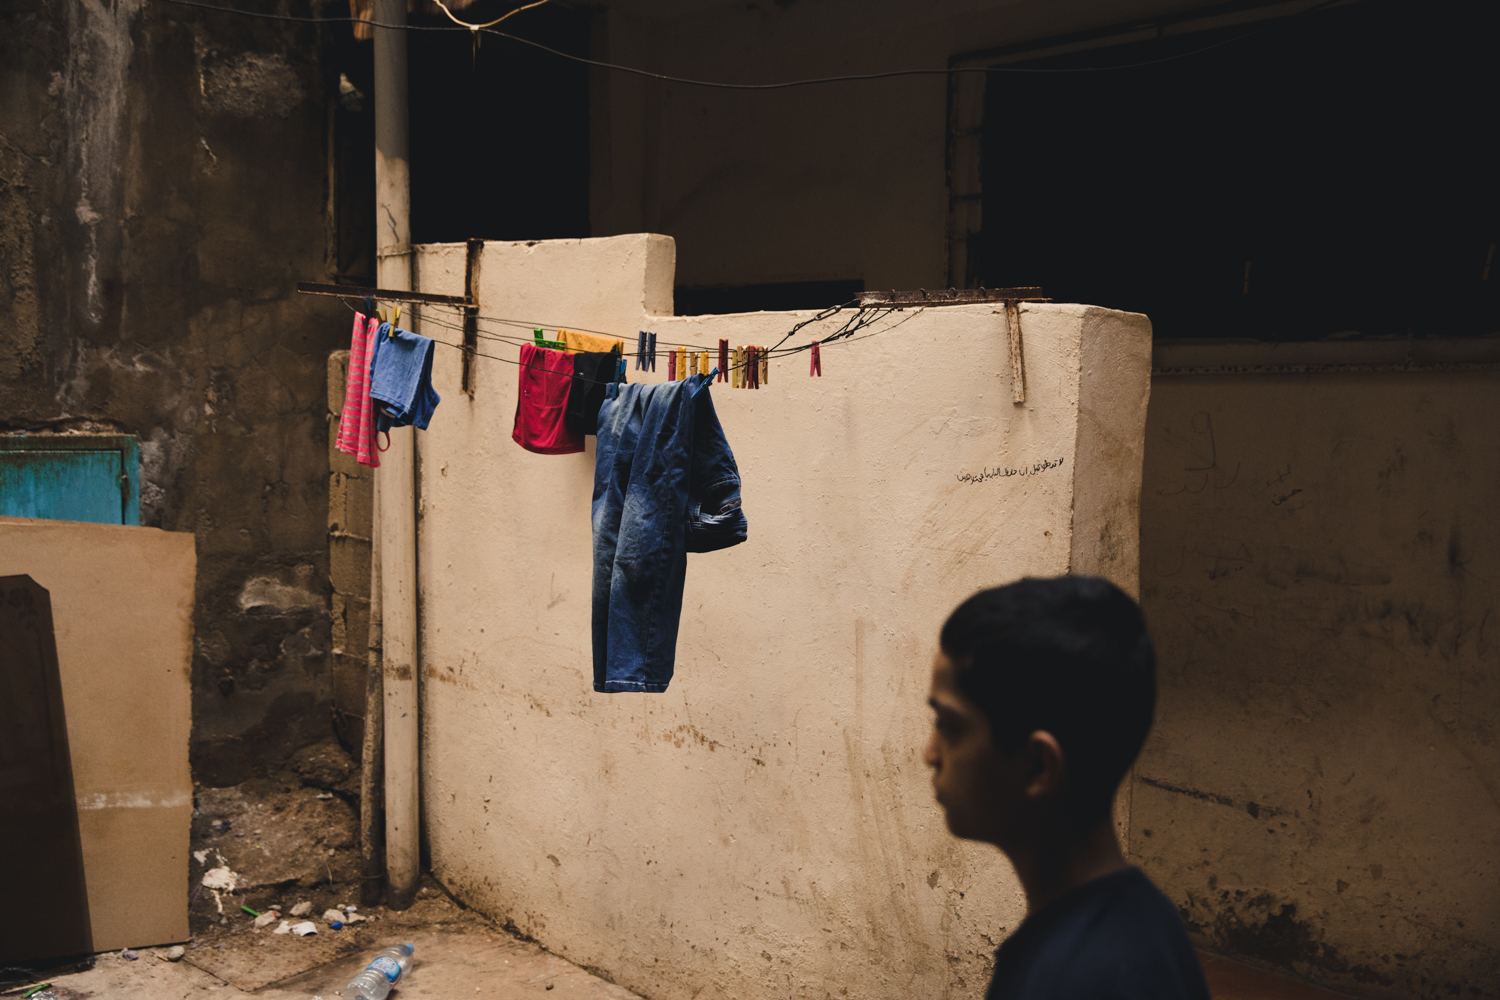  A young man walks past laundry drying inside an alleyway.  